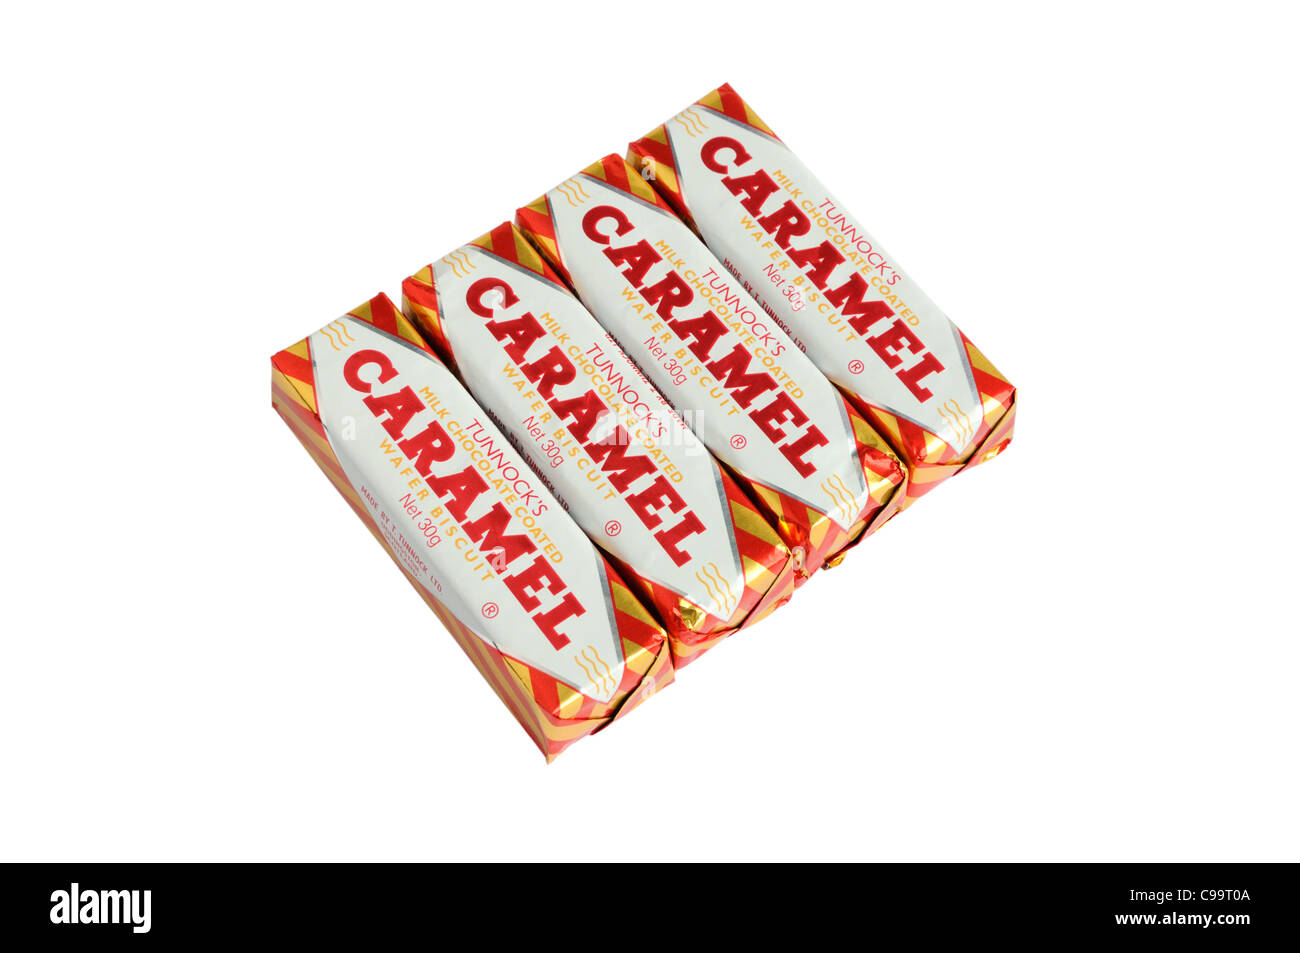 Tunnock's caramel wafer biscuits Stock Photo